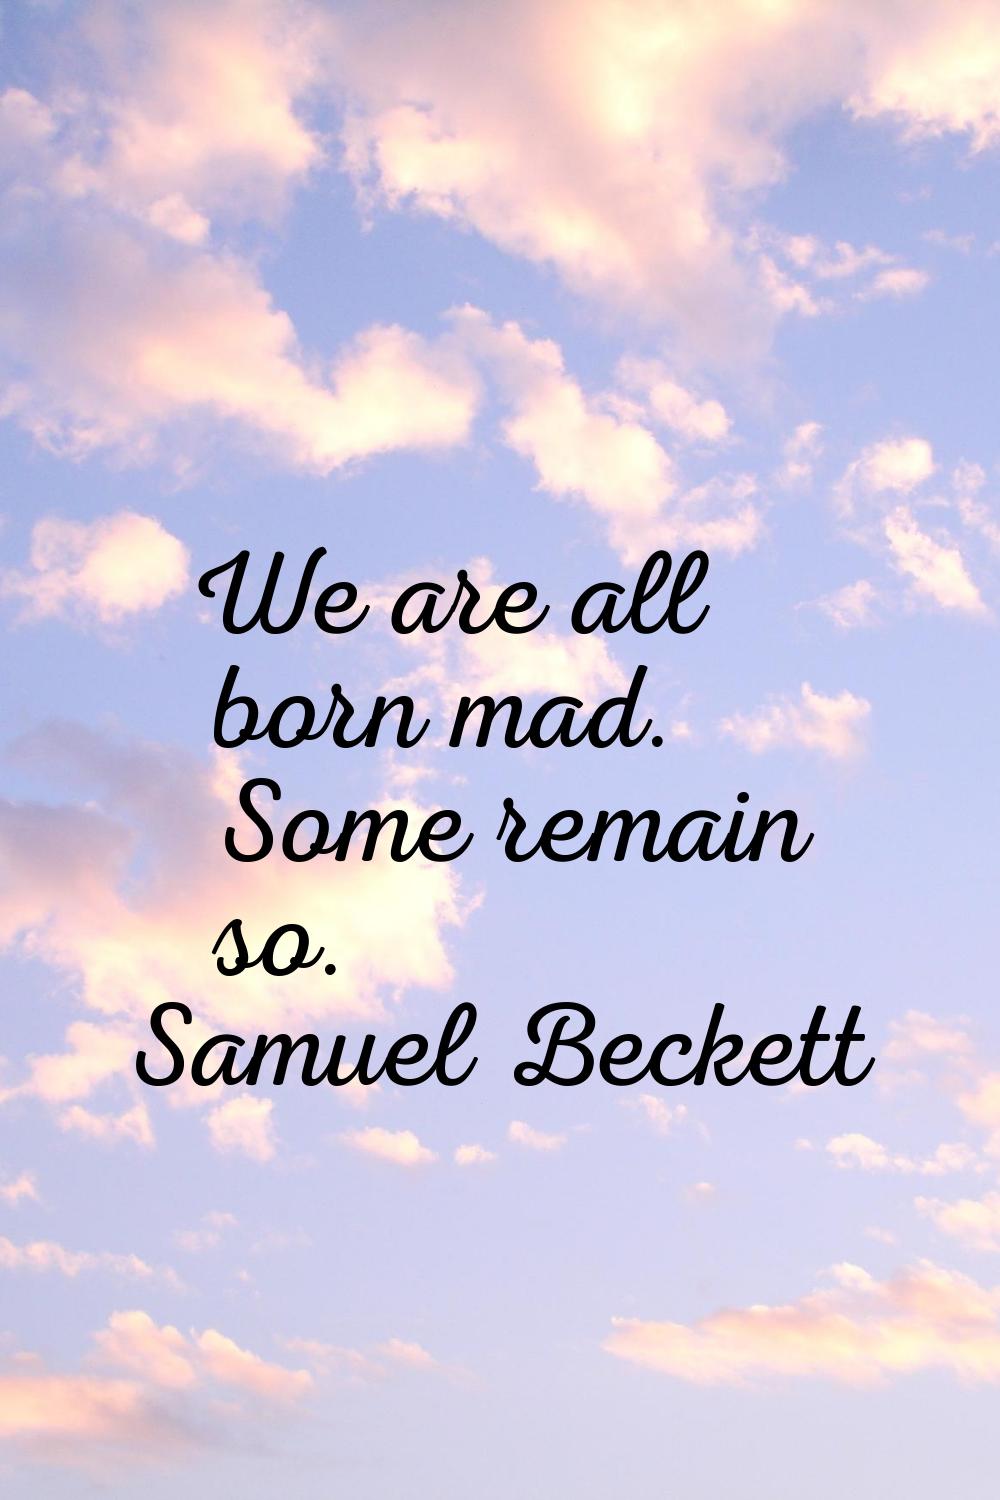 We are all born mad. Some remain so.